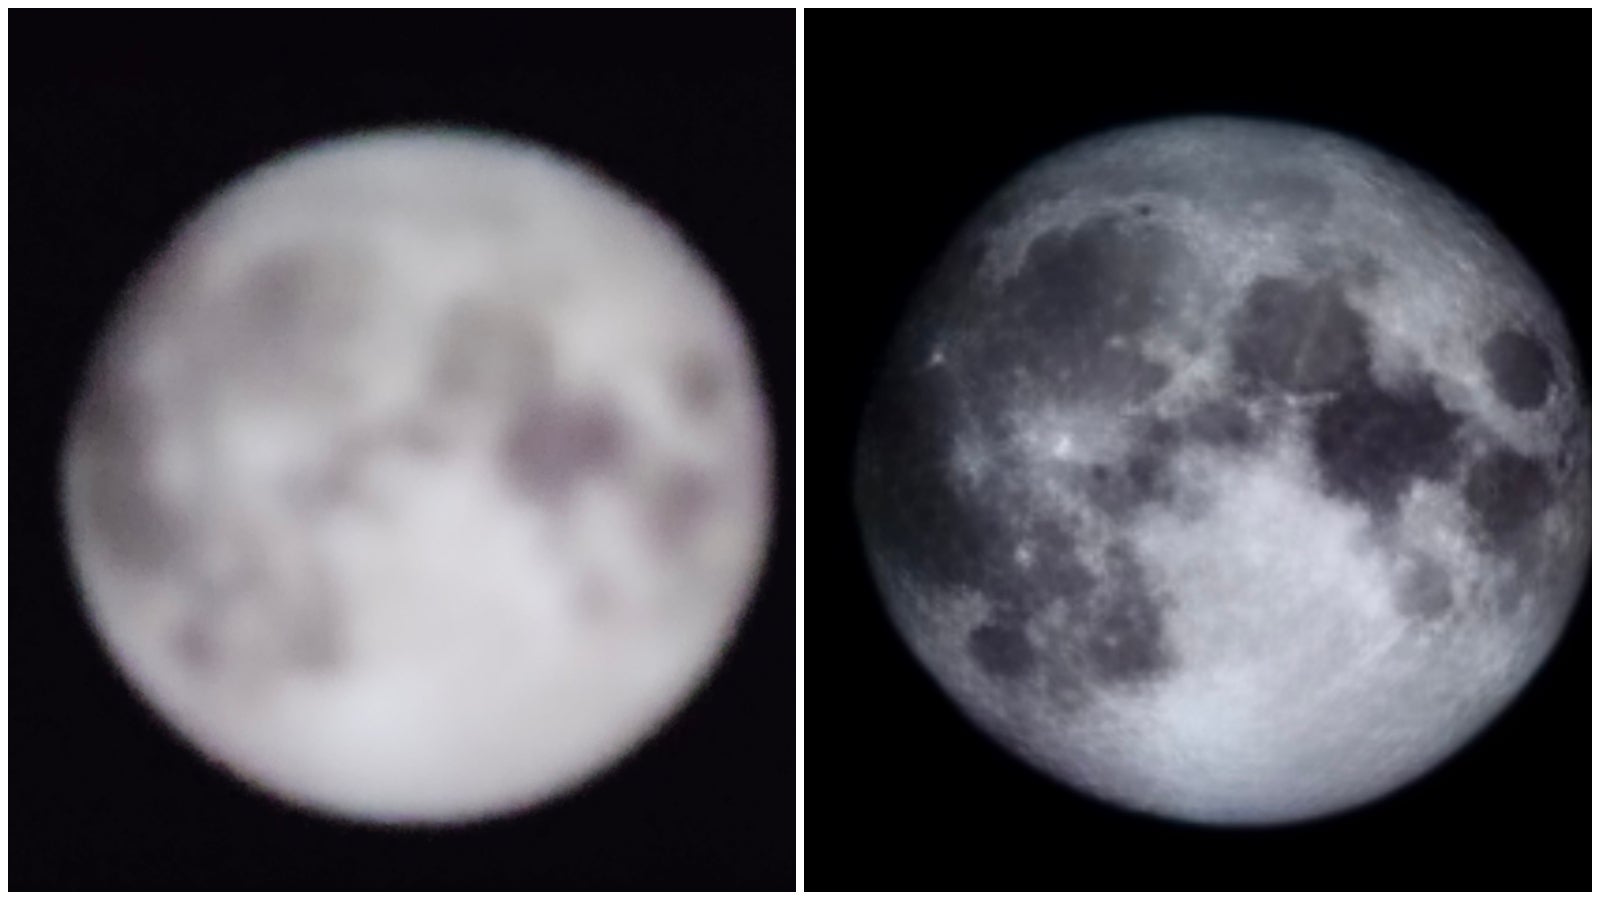 On the left is the very same blurry image of the moon as displayed on my MacBook screen; on the right is what the Galaxy S23 Ultra managed to capture when I moved farther back and took a photo beyond 25x zoom - I think it was 50x. - Concluded: Samsung phones take “artificial” moon photos but Samsung has nothing to apologize for